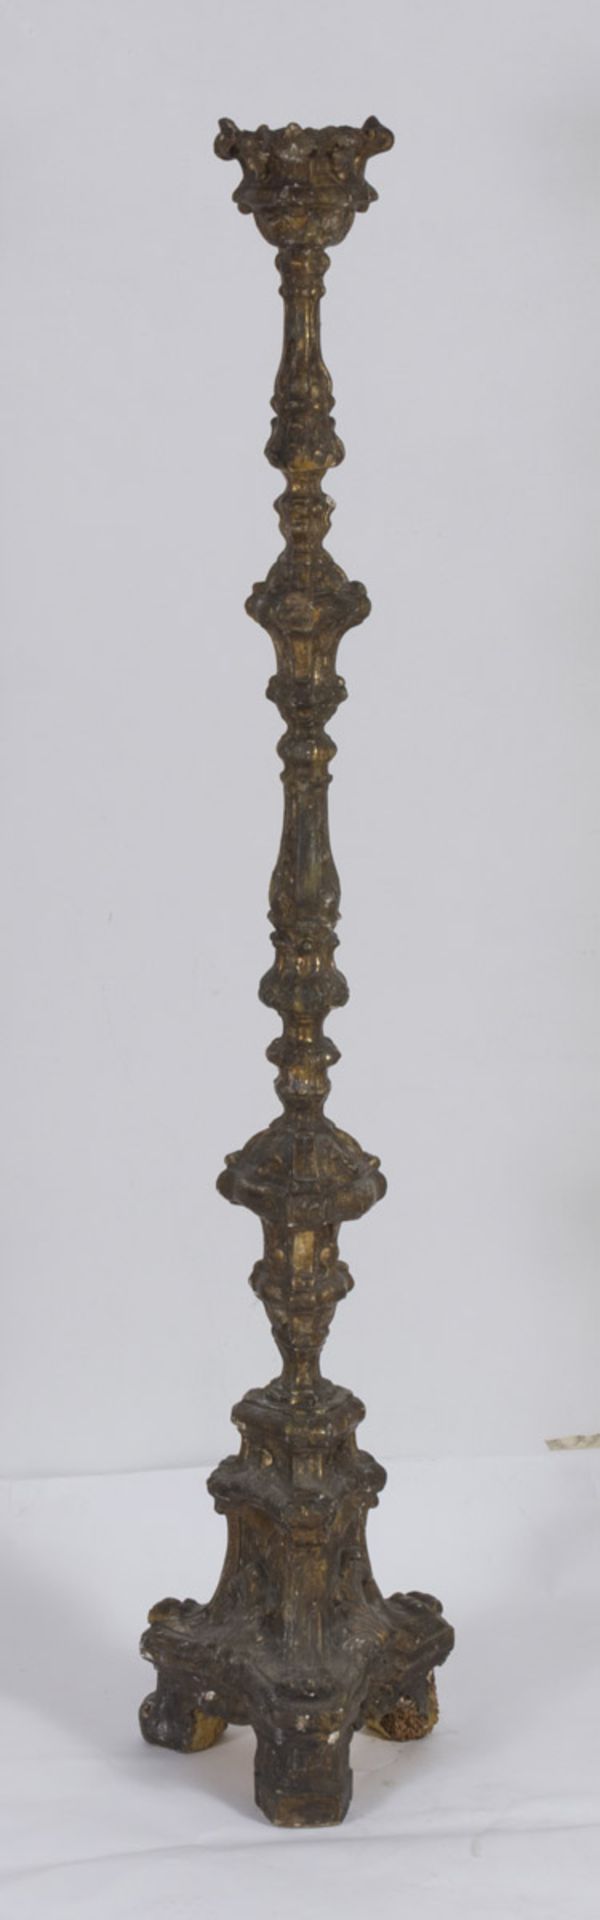 TALL GILTWOOD CANDLESTICK, ROME 18TH CENTURY shaft carved to leaves and spirals. Triangular base